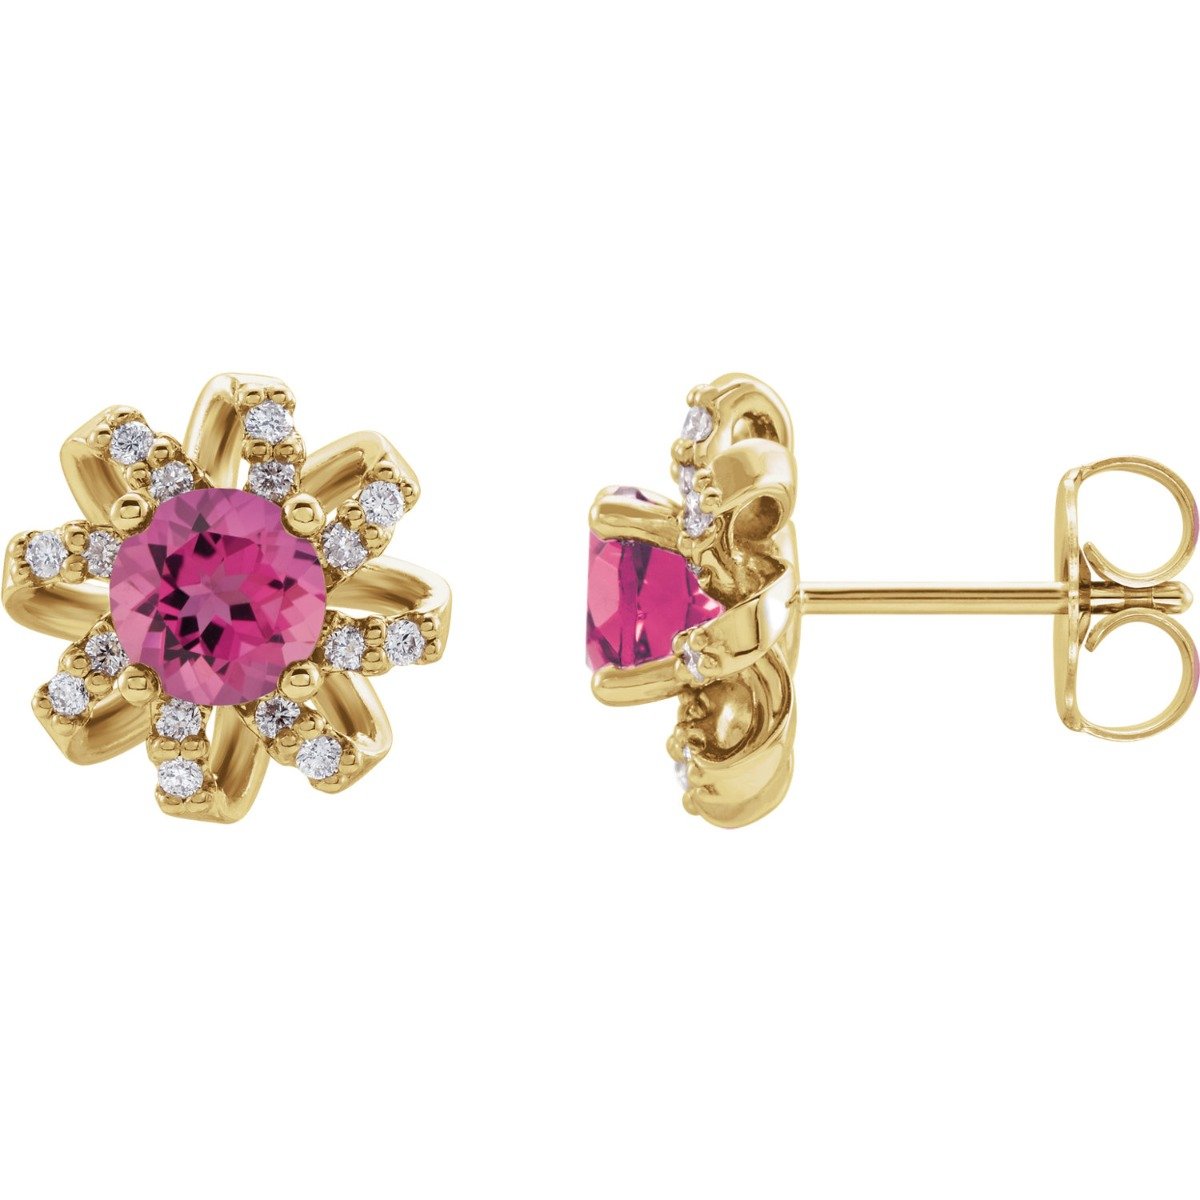 14KT GOLD 1.10 CTW PINK TOURMALINE & 1/8 CTW DIAMOND FLORAL HALO EARRINGS Yellow